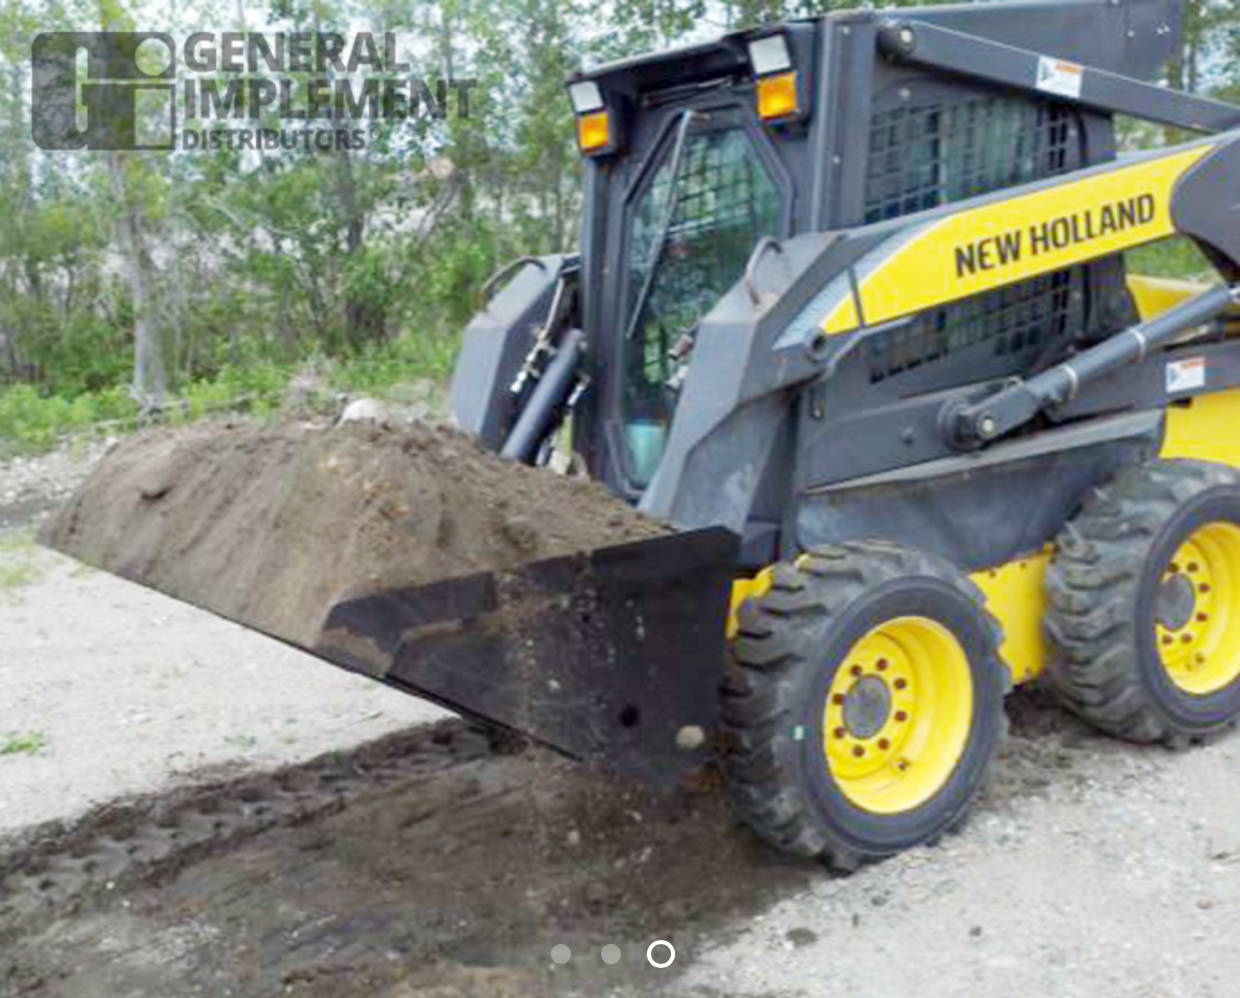 Legend Attachments SKID STEER LOW PROFILE & UTILITY BUCKETS